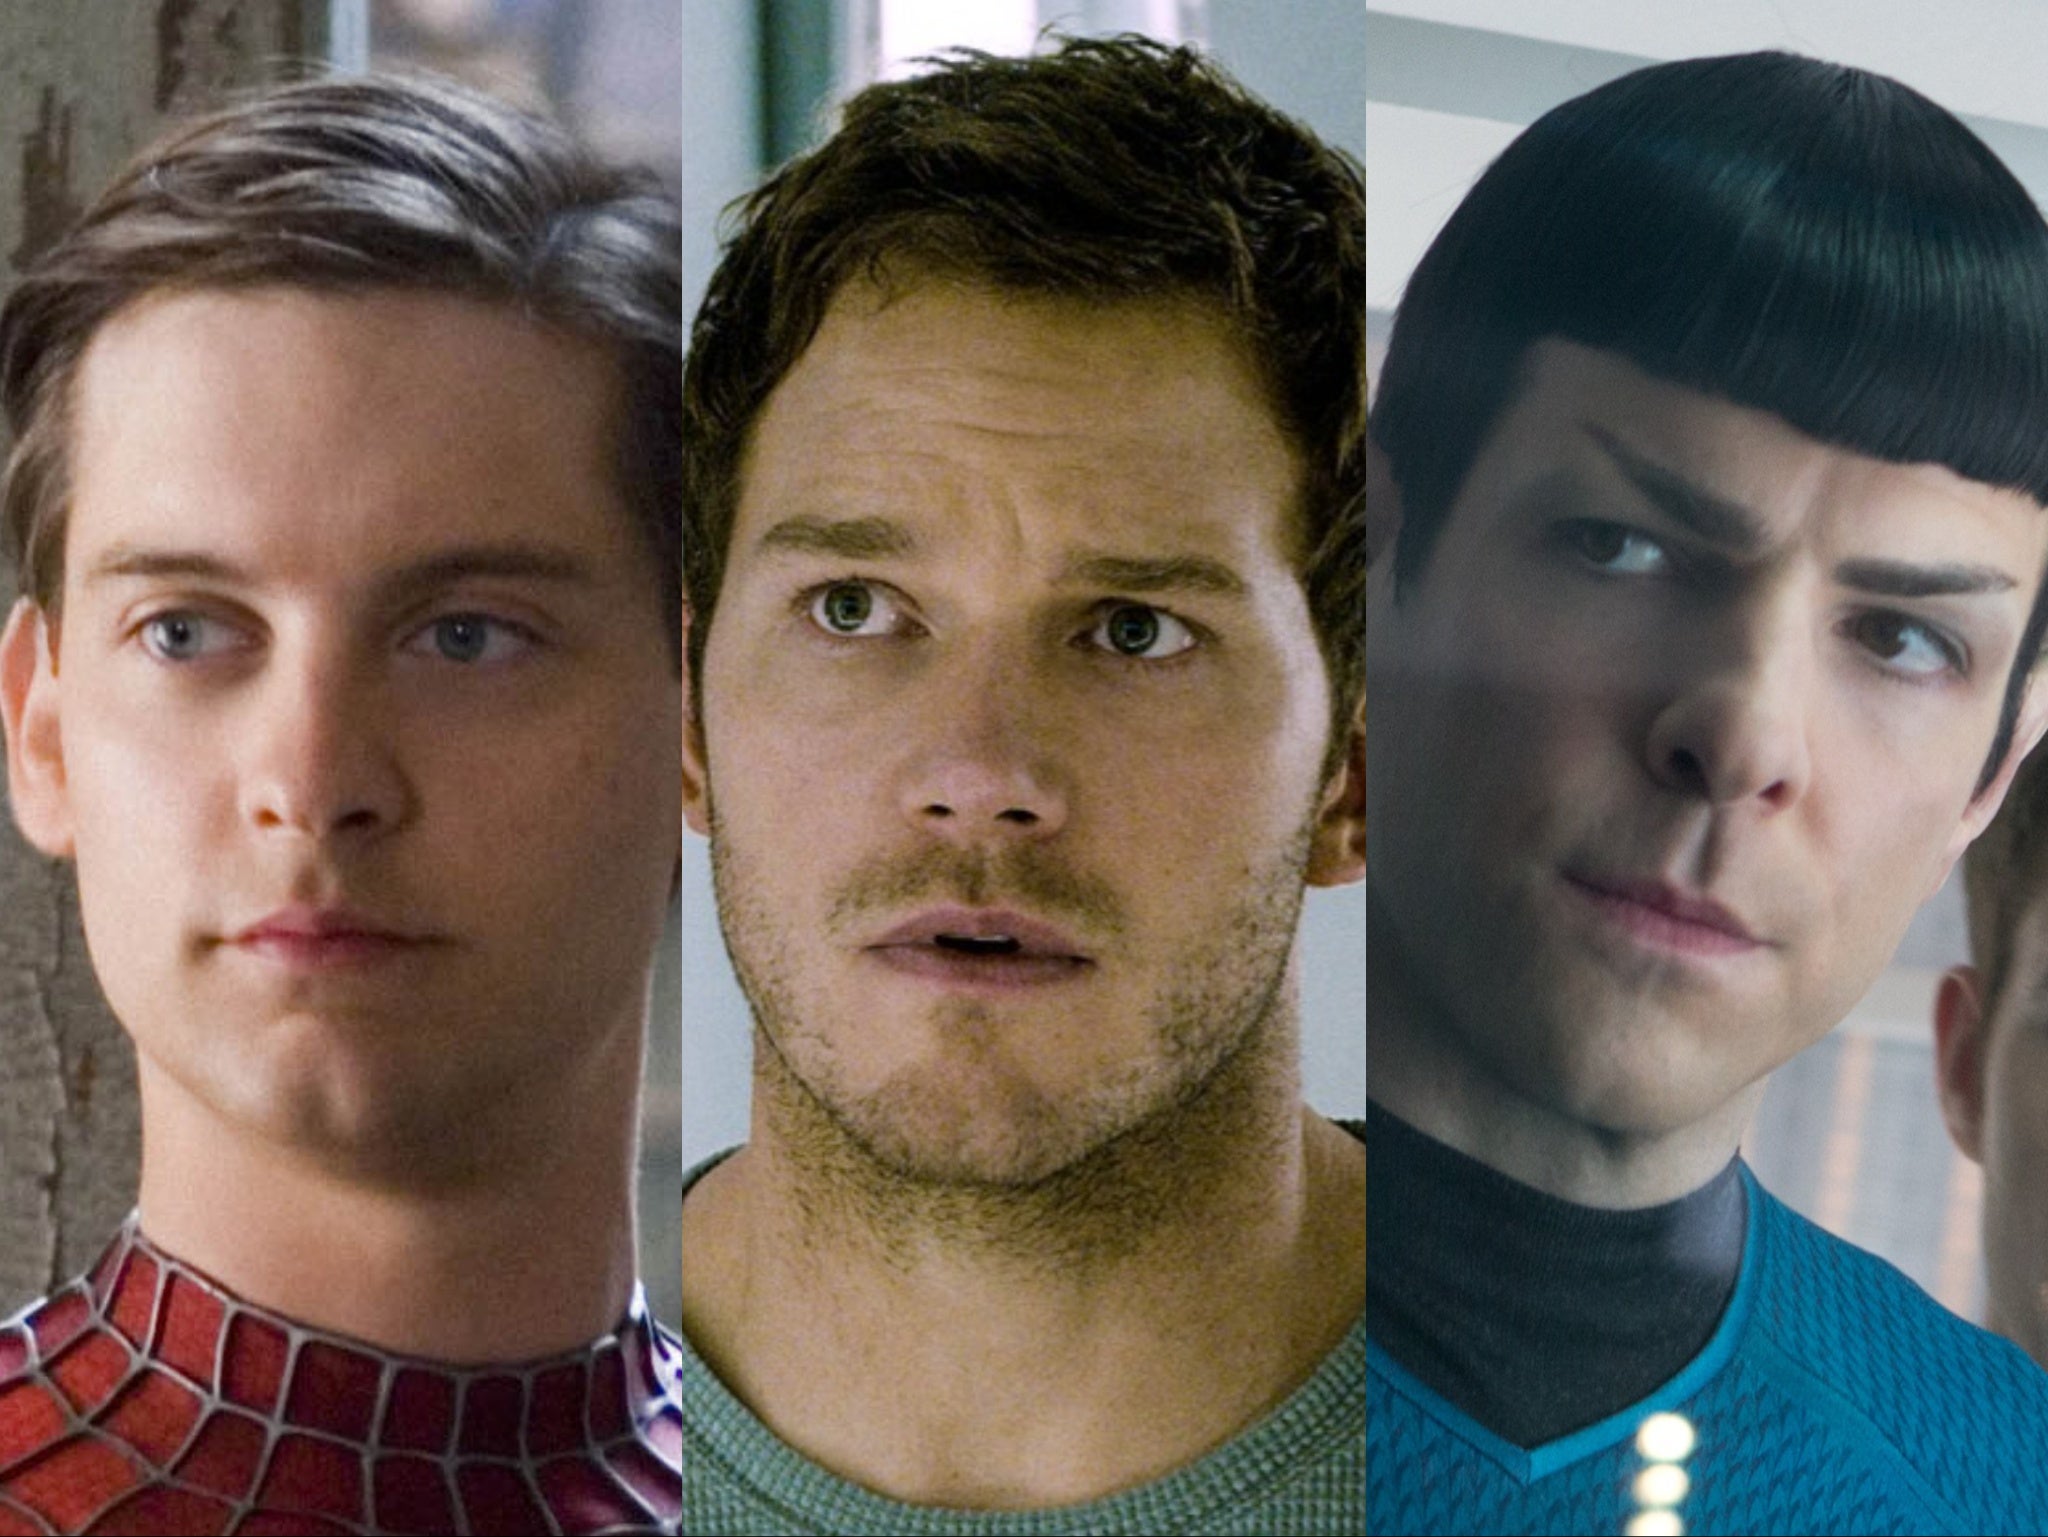 Tobey Maguire in ‘Spider-Man 3’, Chris Pratt in ‘Passengers’ and Zachary Quinto in ‘Star Trek Into Darkness'